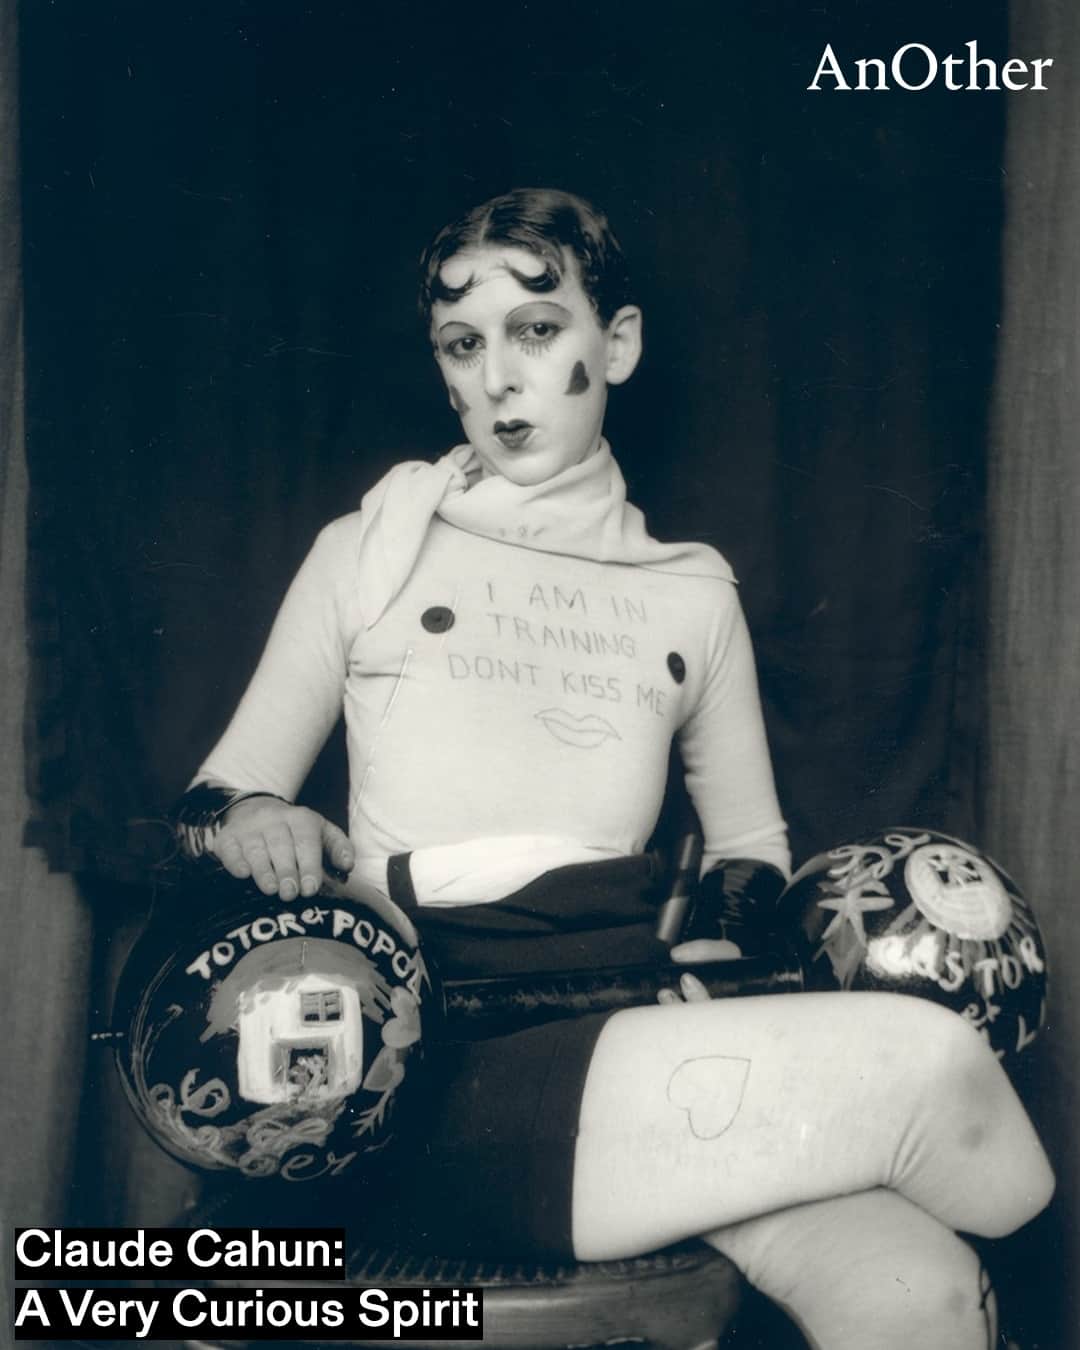 AnOther Magazineのインスタグラム：「Since today would have been Claude Cahun's birthday, we are going under the many skins of the Surrealist writer and photographer 🫀⁠ ⁠ Whilst living in Paris, Cahun associated with Man Ray, Salvador Dalí and André Breton – the latter describing her as "one of the most curious spirits of our time." Following her death, Cahun was as good as excised from the Surrealist roster, remaining largely uncelebrated until the 1980s when her striking photographs became known. At the link in bio, AnOther delves into the life and times of the artist who was an early thinker in gender, identity and sexuality 📲⁠ ⁠ 📸 1. #ClaudeCahun, 1927. Courtesy of @jerseyheritage⁠ 2. Claude Cahun, 1928. Courtesy of Jersey Heritage Collections⁠ 3. Claude Cahun as Elle in Barbe bleue, 1929. Courtesy of Jersey Heritage Collections⁠ 4. Claude Cahun, 1939. Courtesy of Jersey Heritage Collections⁠ 5. Claude Cahun, 1939. Courtesy of Jersey Heritage Collections⁠ 6. Claude Cahun, 1920. Courtesy of Jersey Heritage Collections」